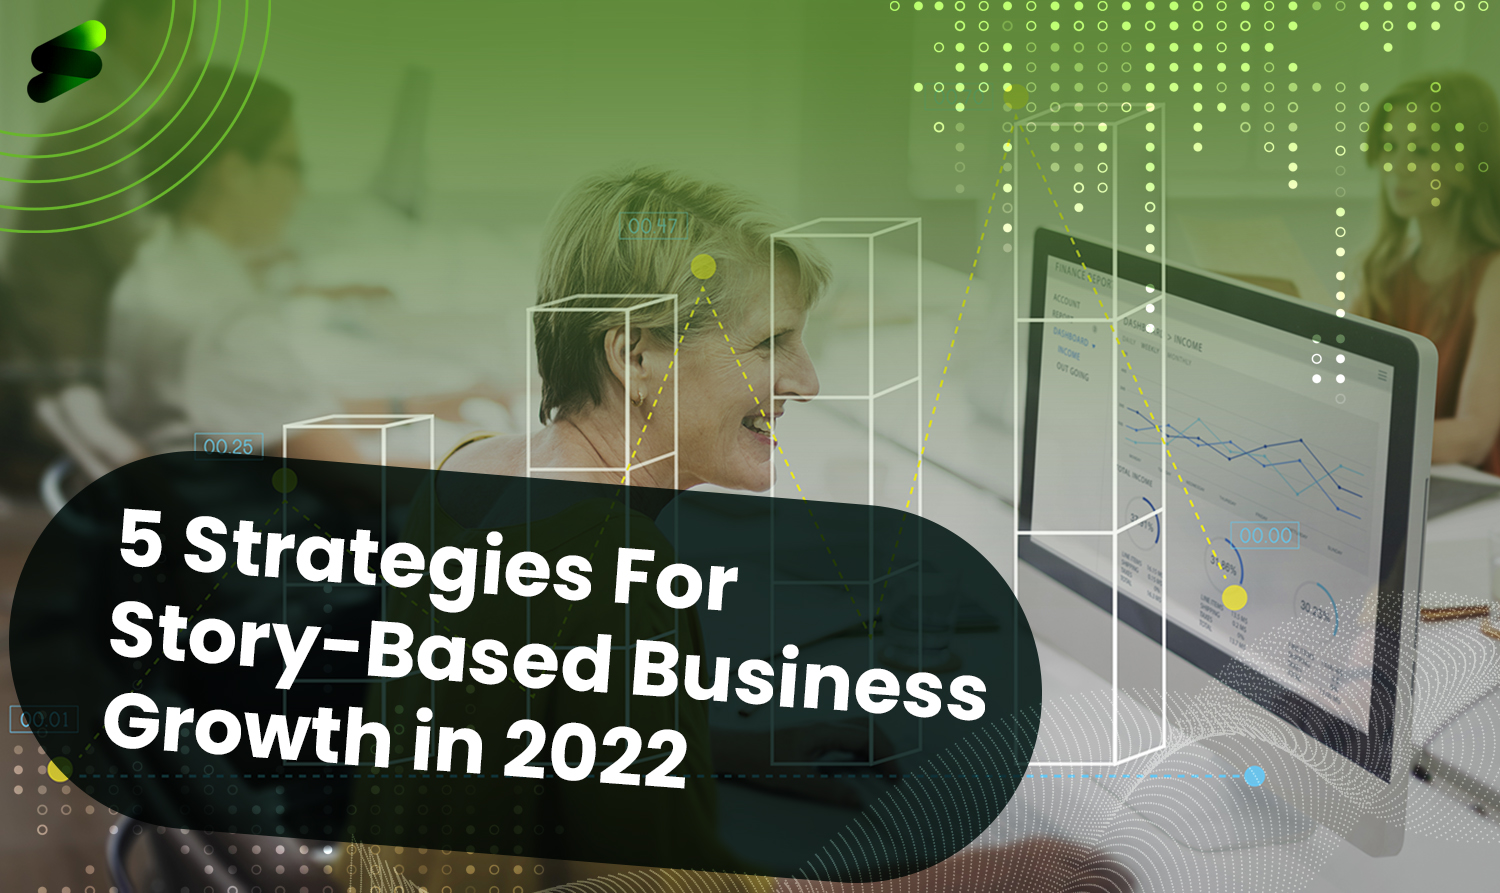 5 Strategies For Story-Based Business Growth in 2022